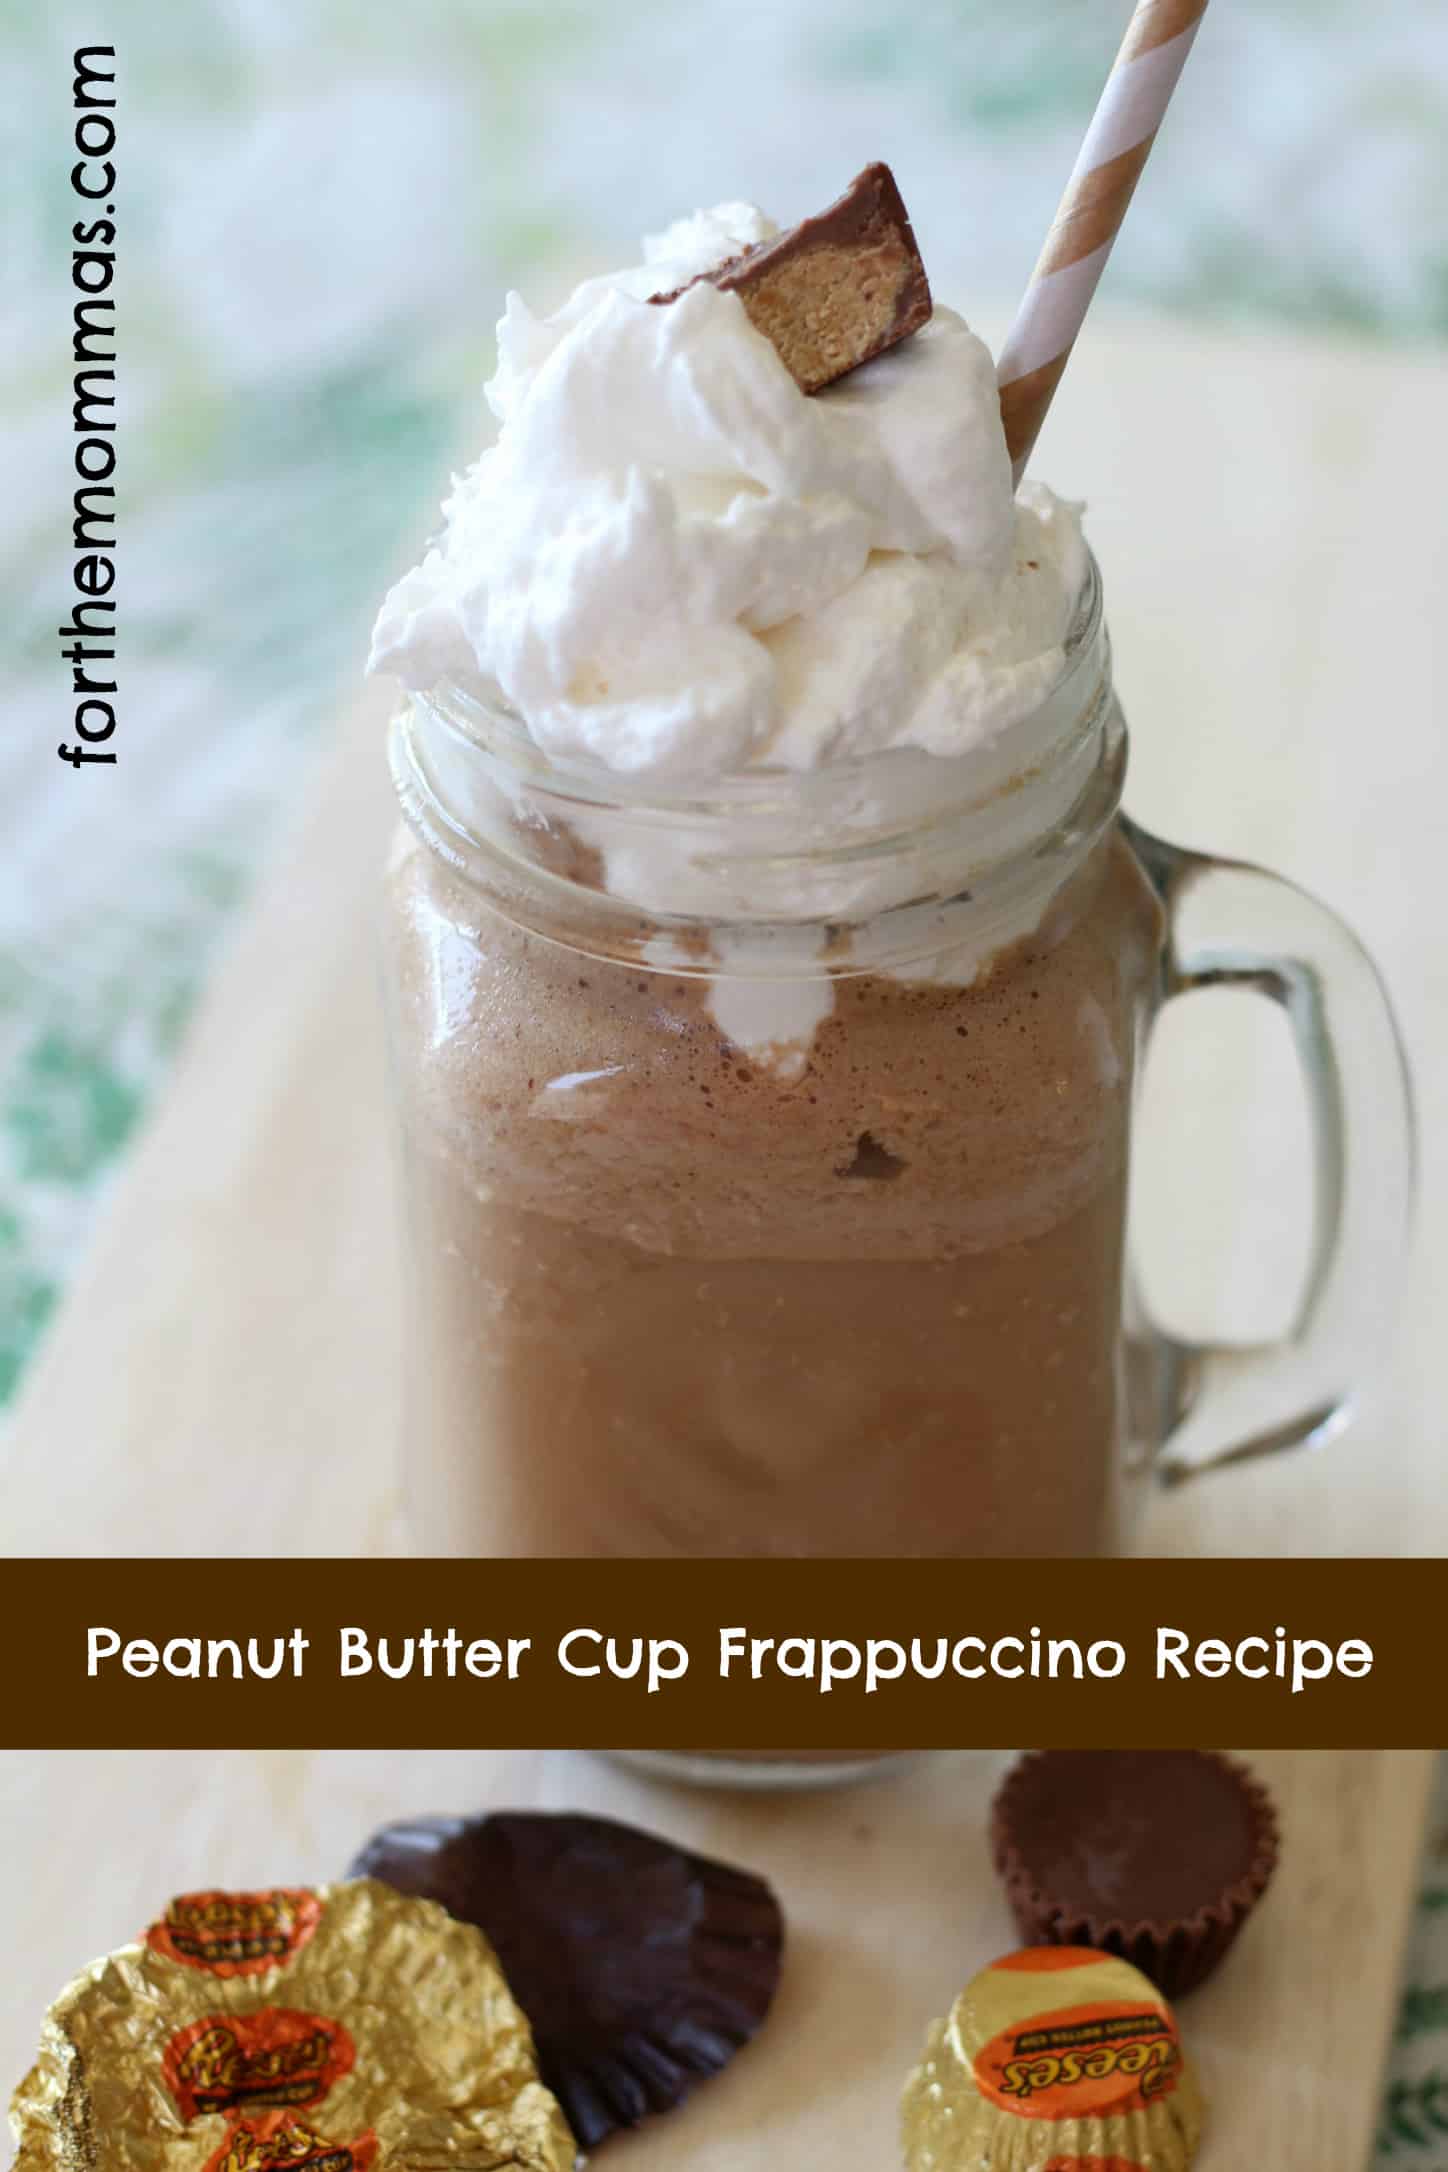 Effortless Peanut Butter Cup Frappuccino Recipe – #TastyTuesday